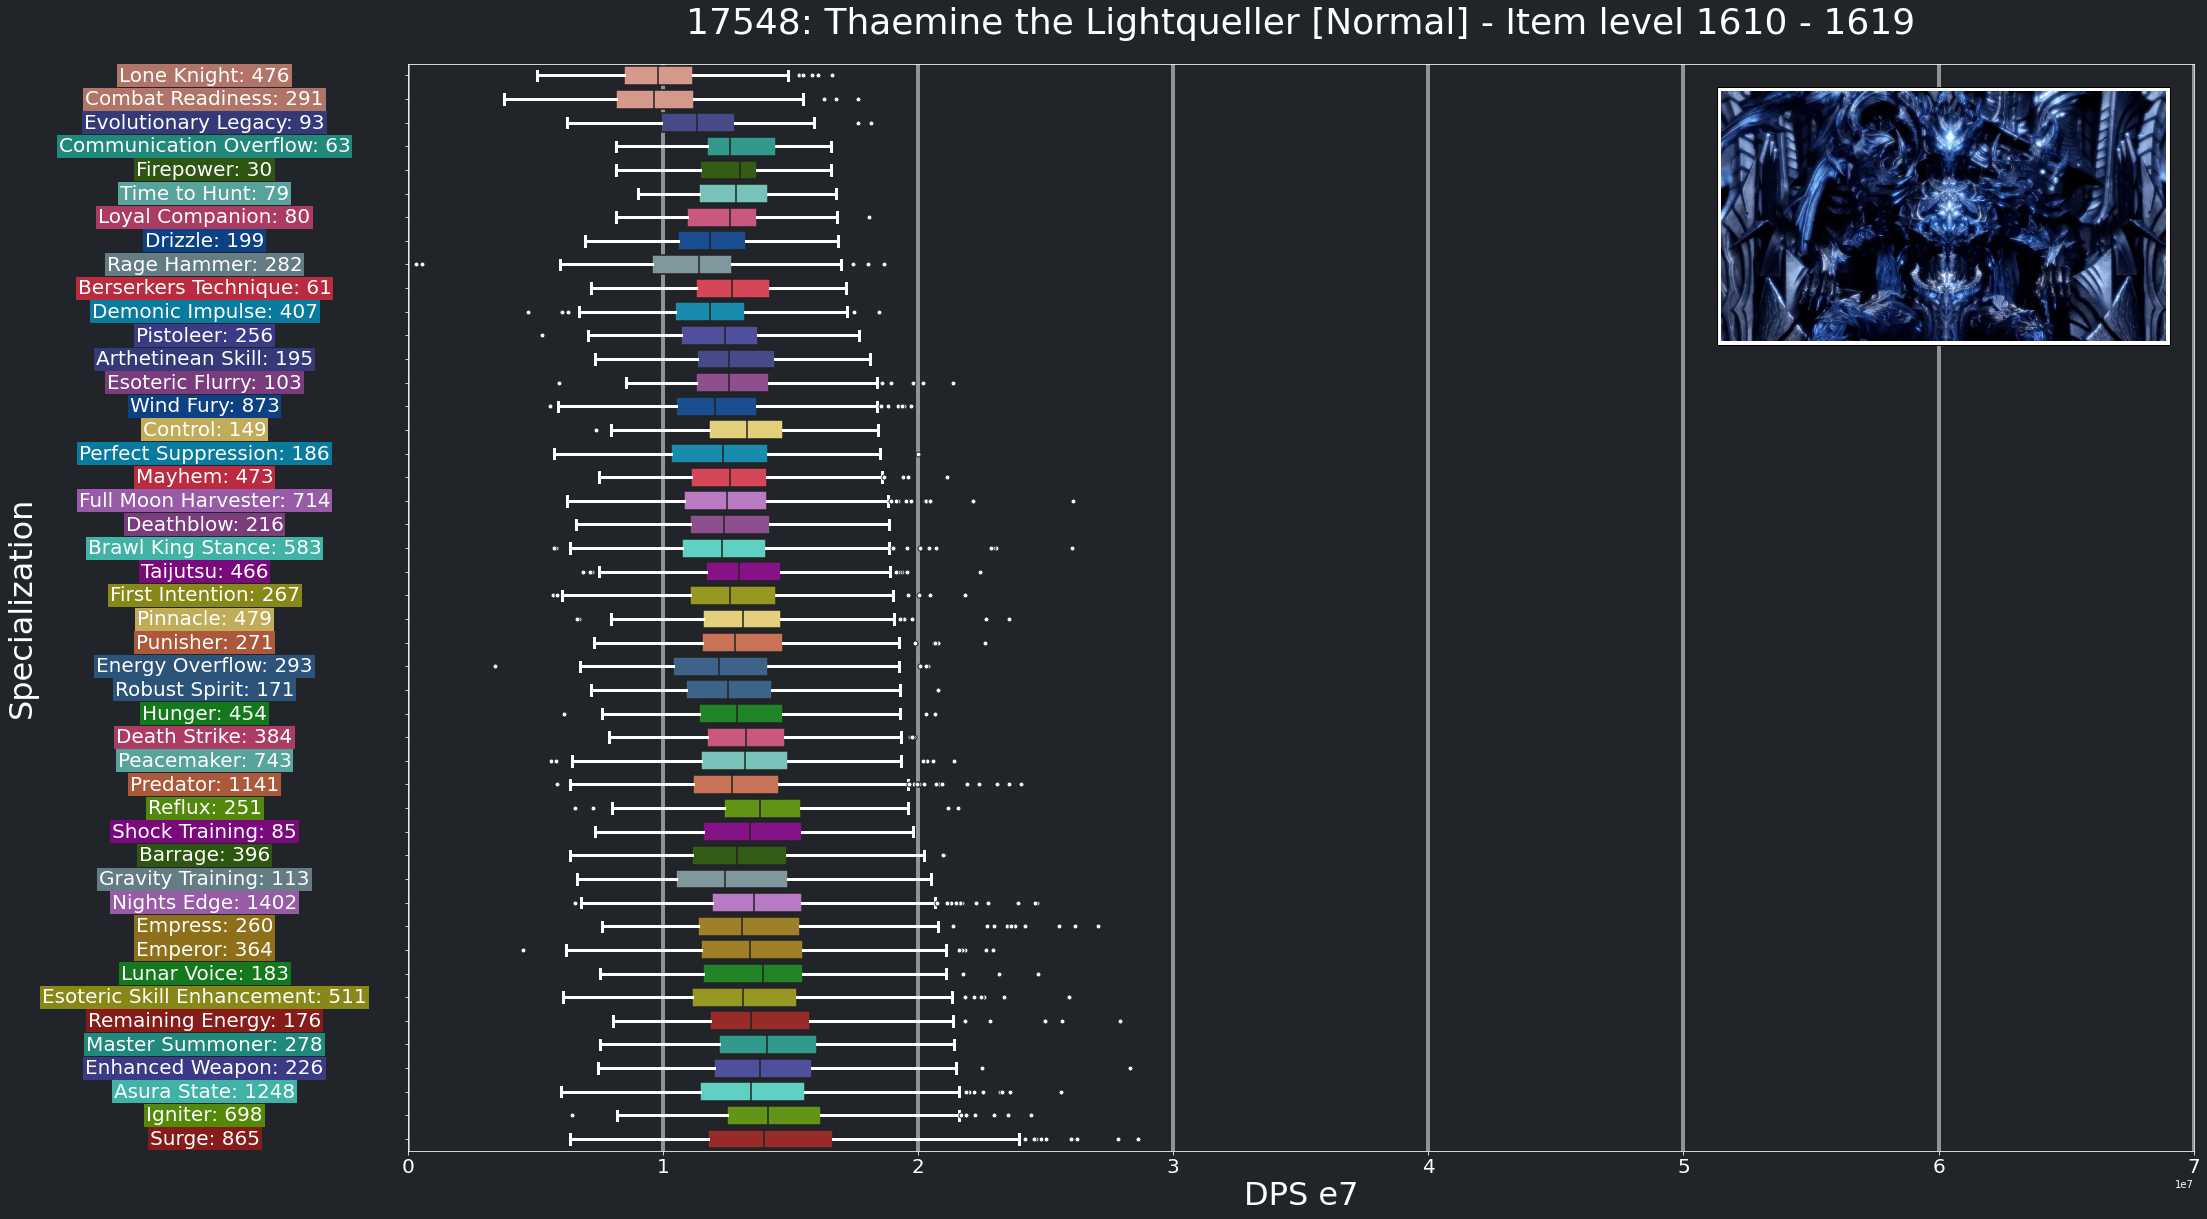 DPS_ThaeminetheLightquellerNormal_1610to1620_Max.png